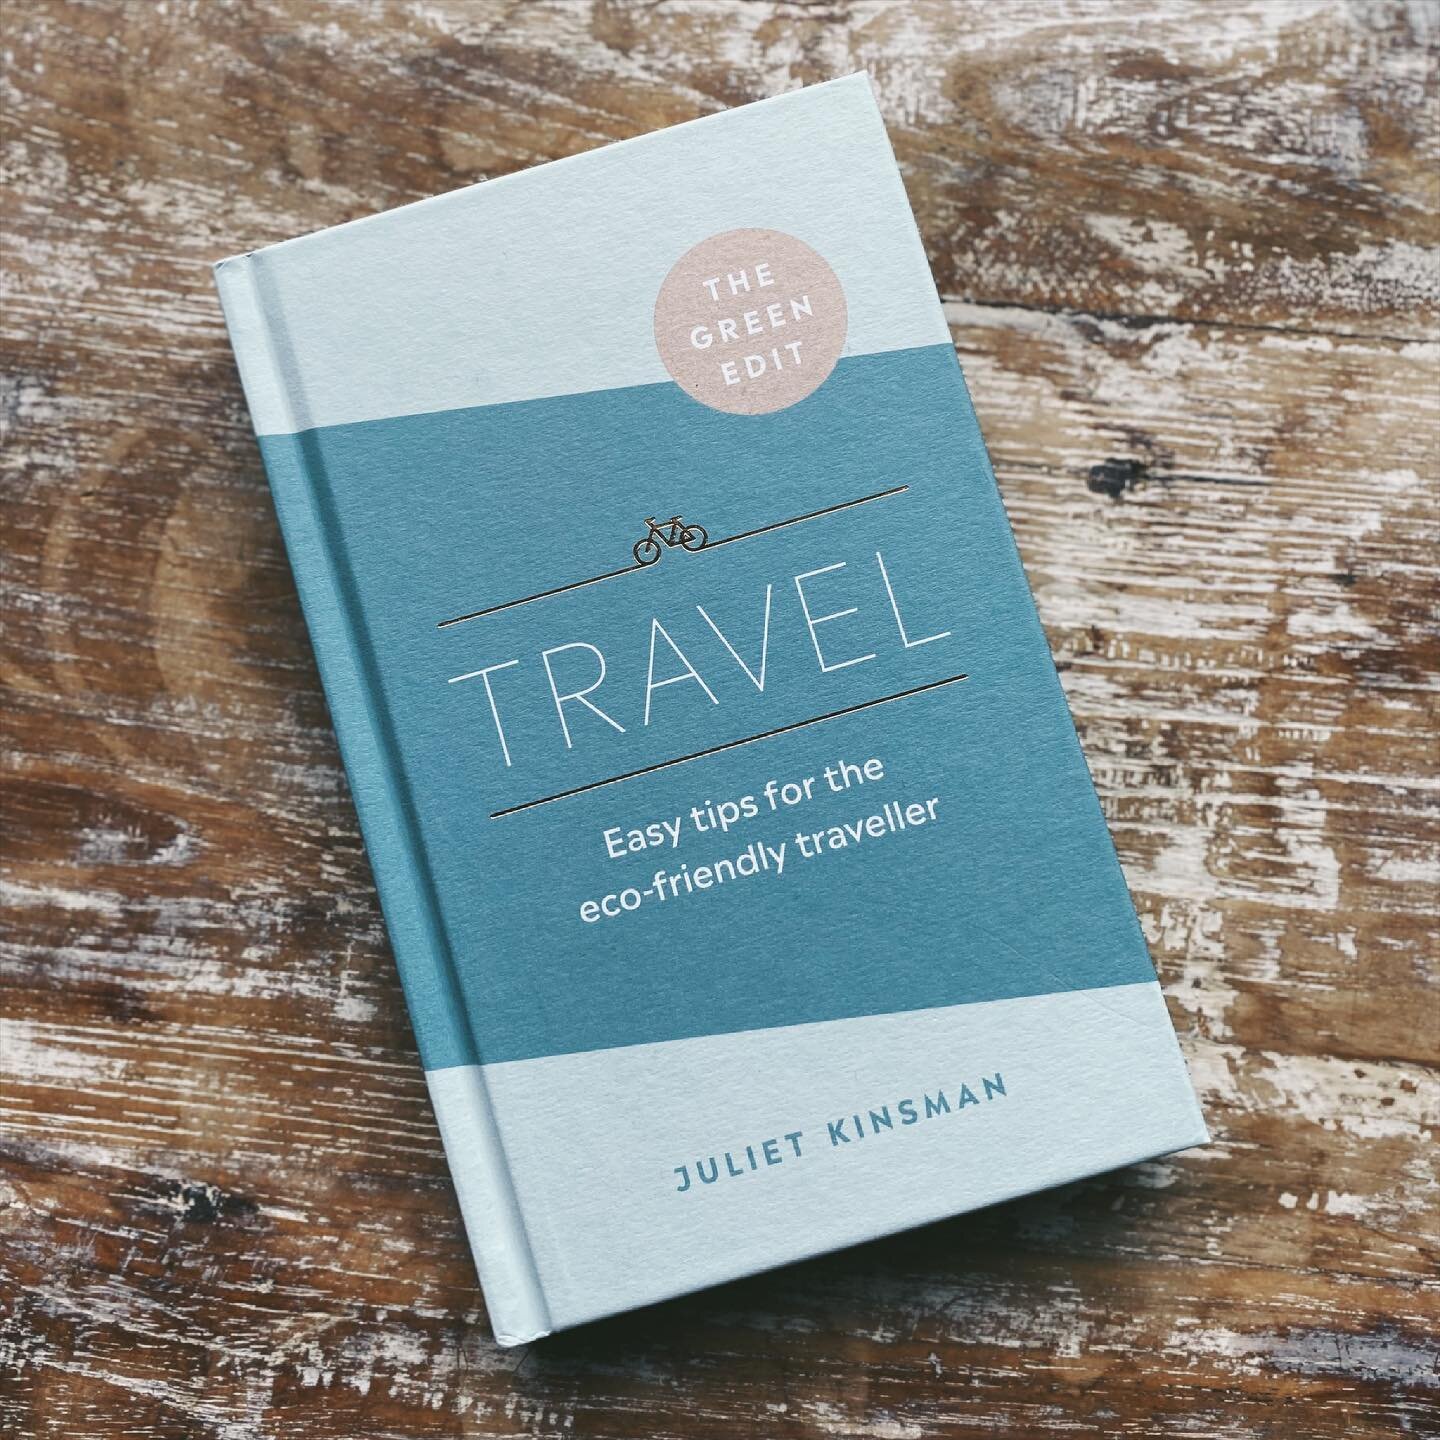 TRAVEL is back! It&rsquo;s time to travel better: from today in the UK, we can stay in hotels and travel abroad for leisure. &lsquo;The Green Edit: Travel, Easy Tips for the Eco-Friendly Traveller&rsquo; is the pocket-sized sustainable travel handboo